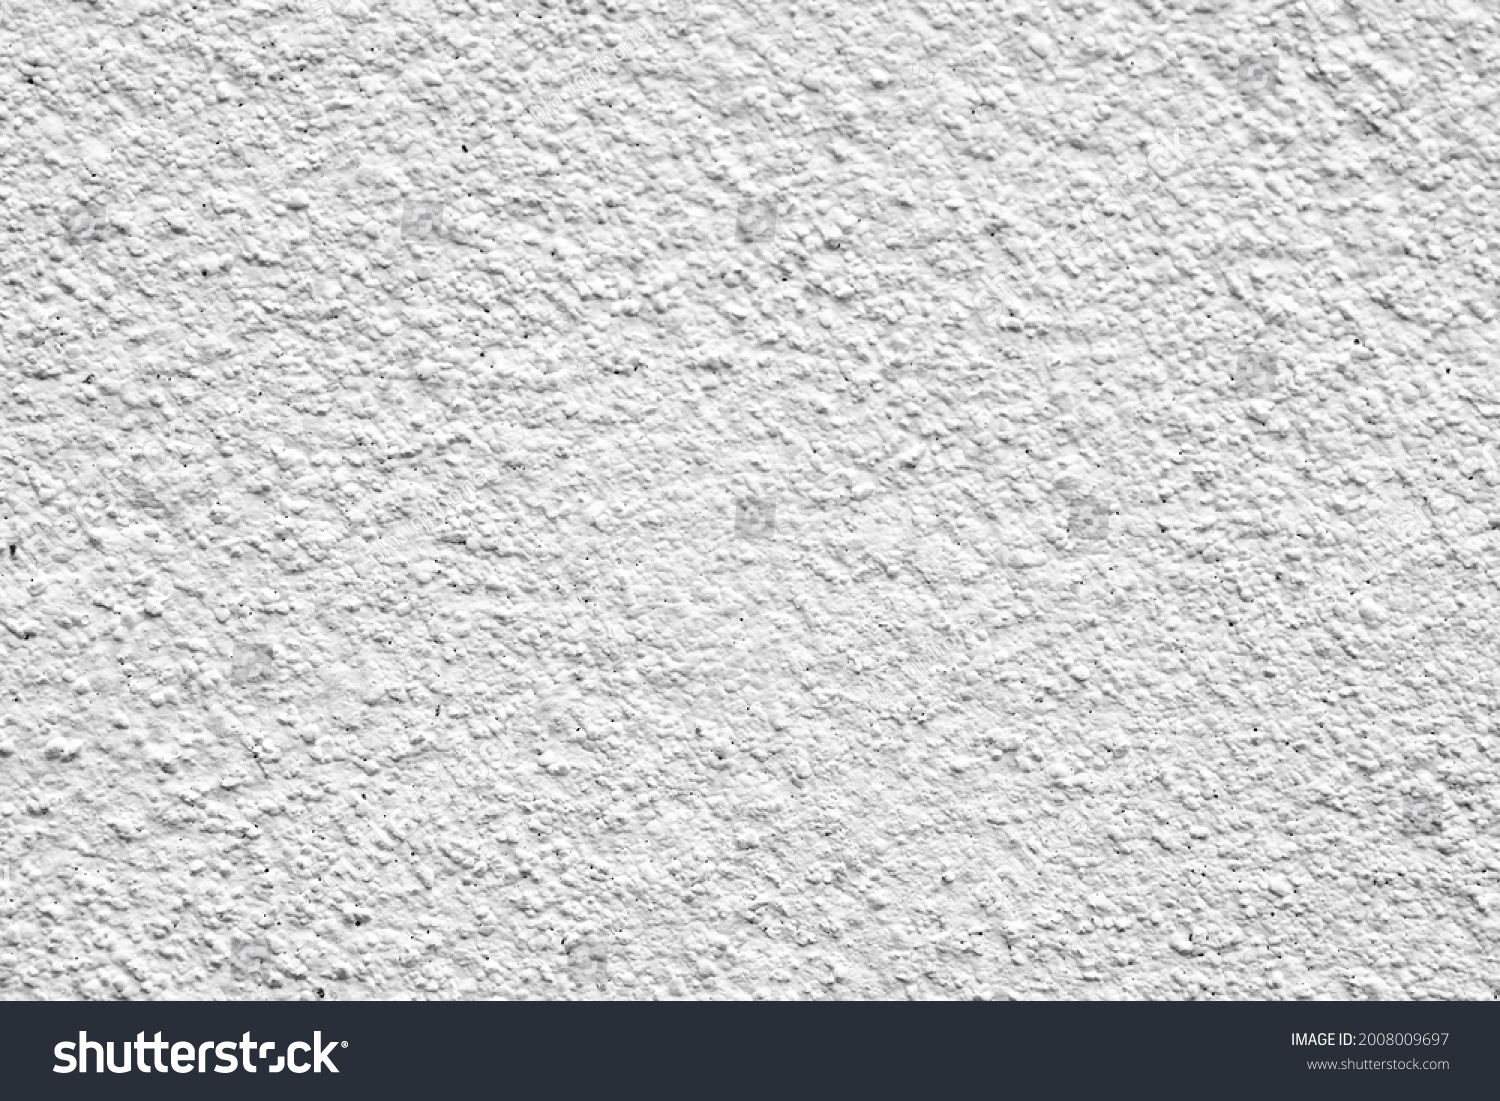 Rough surface of a concrete wall painted in greyish white, concrete wall background, blurred white background. #2008009697